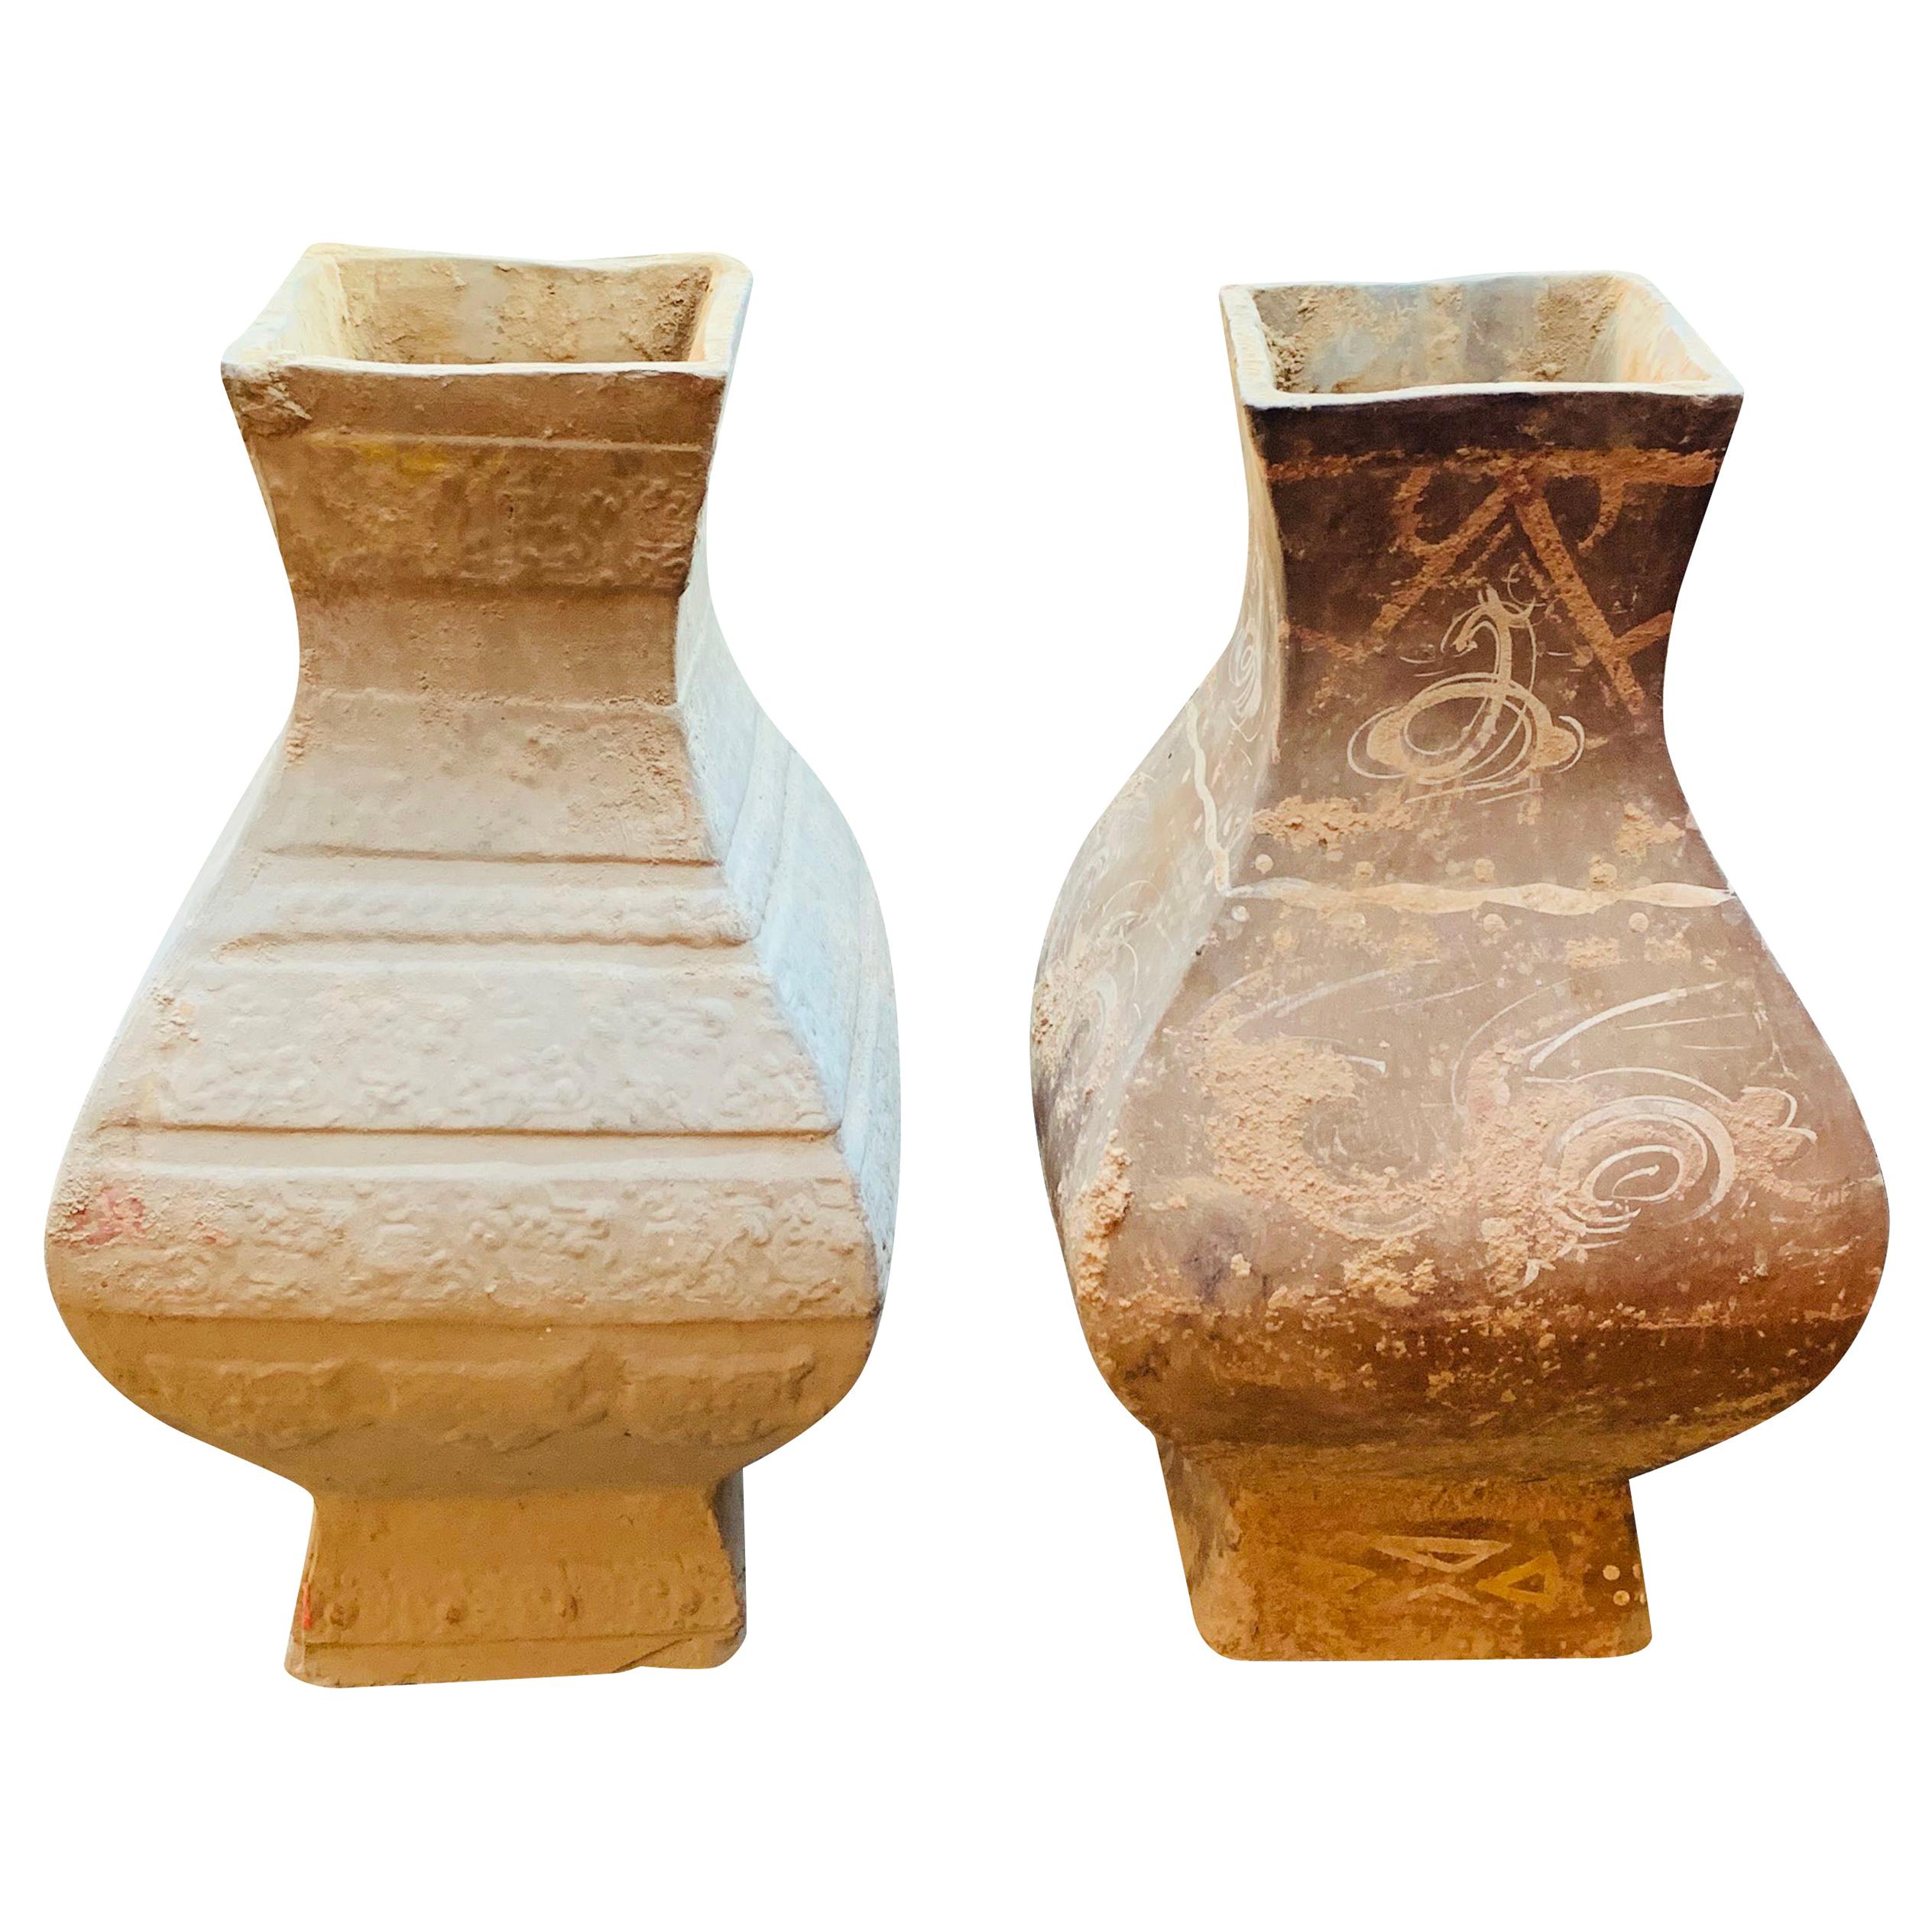 These two Chinese hand painted lidded vases are contemporary but the weathered patina is designed to look ancient.
Both have a finial shape with square top, each having a different hand painted design.
Two available and sold individually.
  